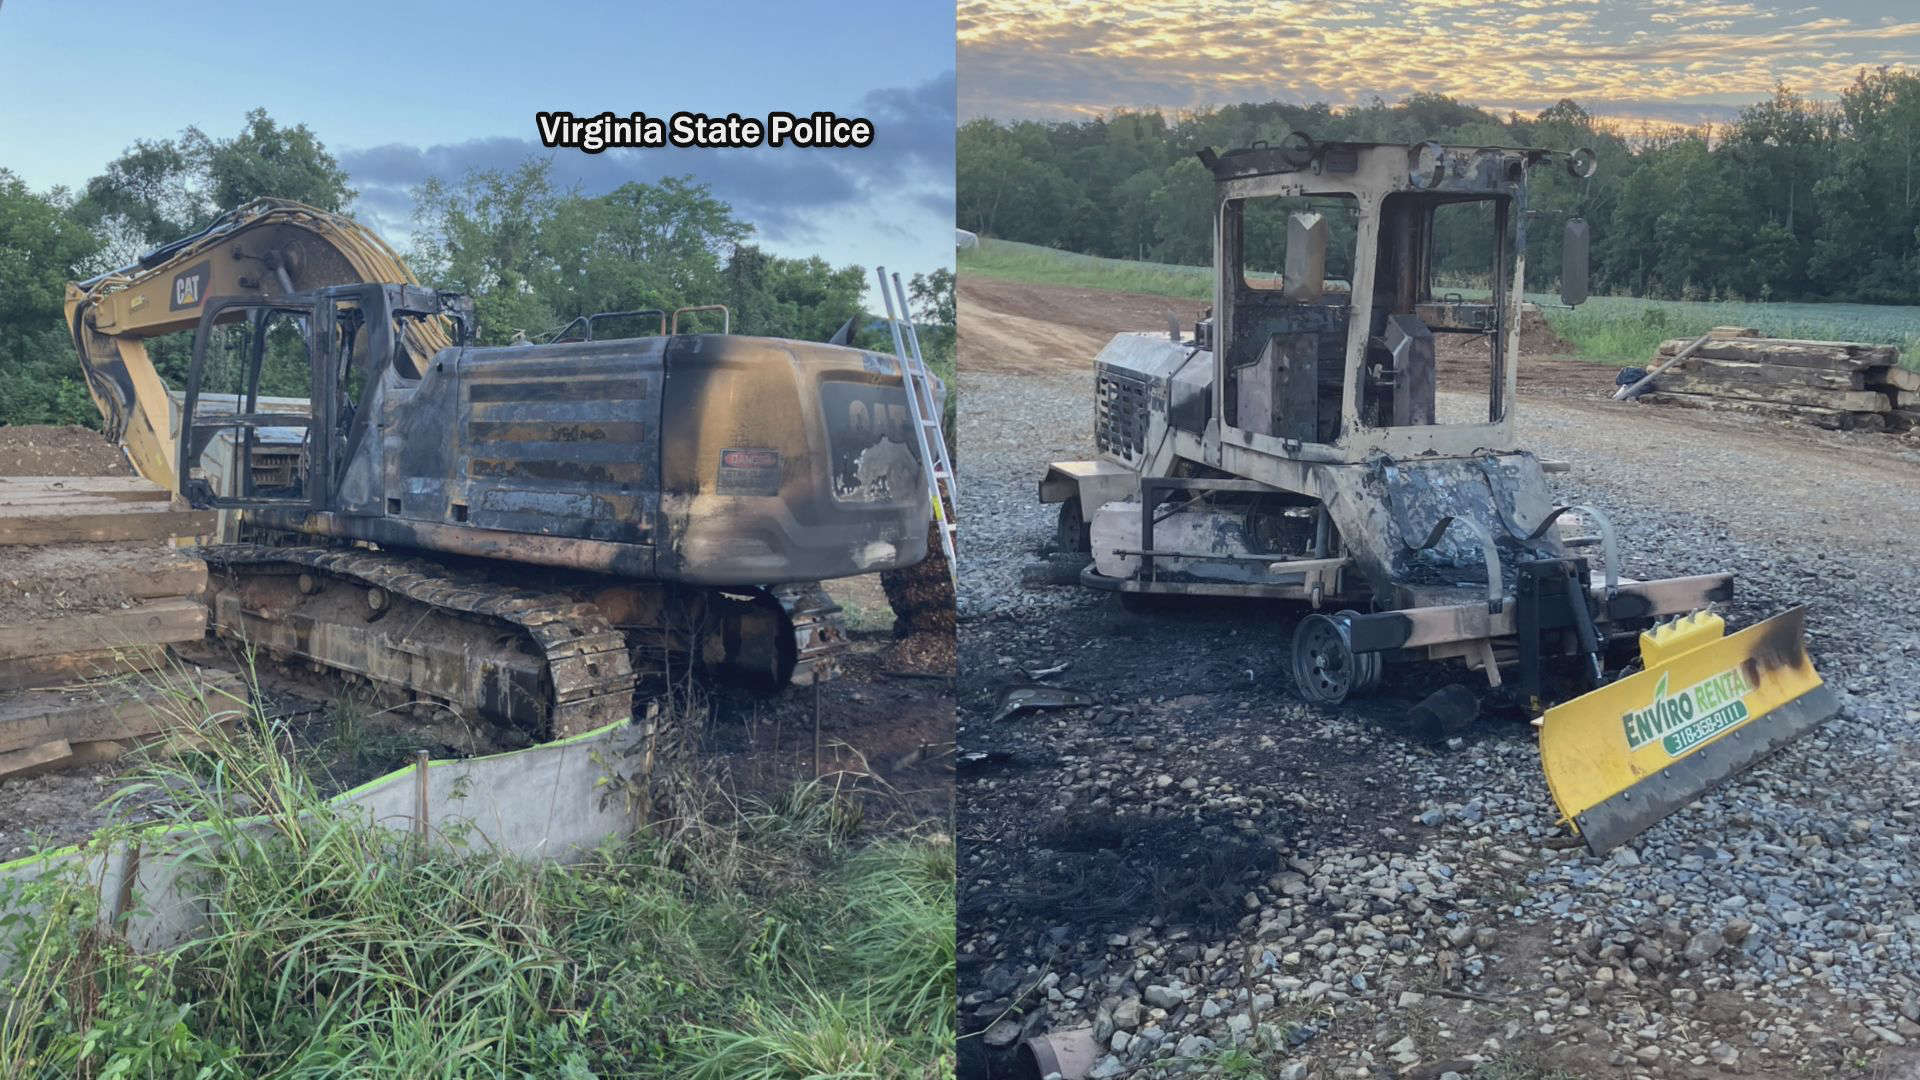  On the left, an image of a burned out excavator from behind in a worksite. The text 